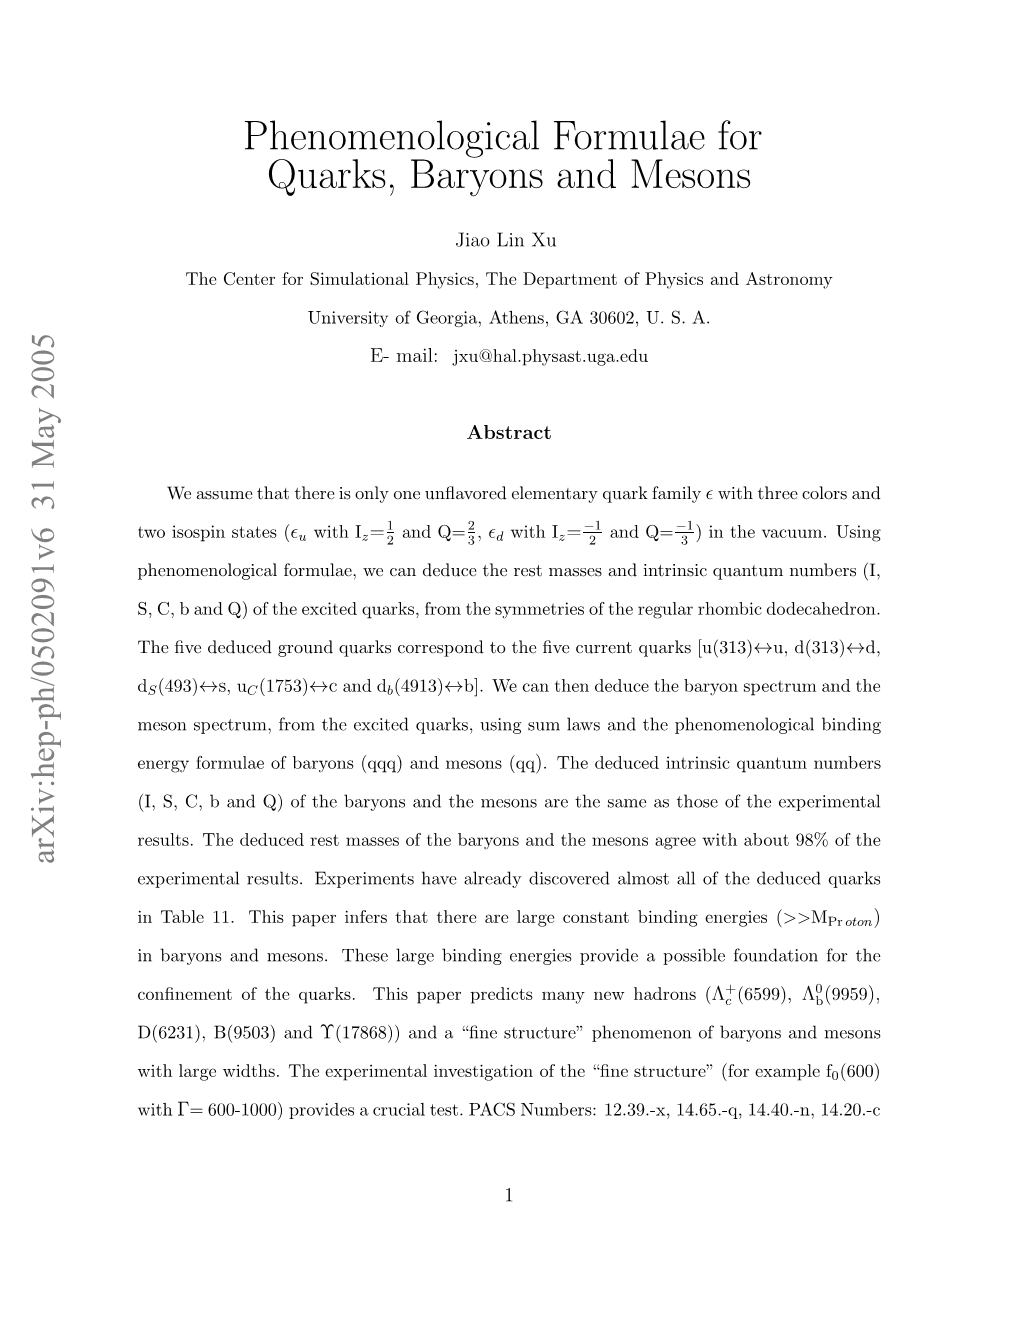 Phenomenological Formulae for Quarks, Baryons and Mesons